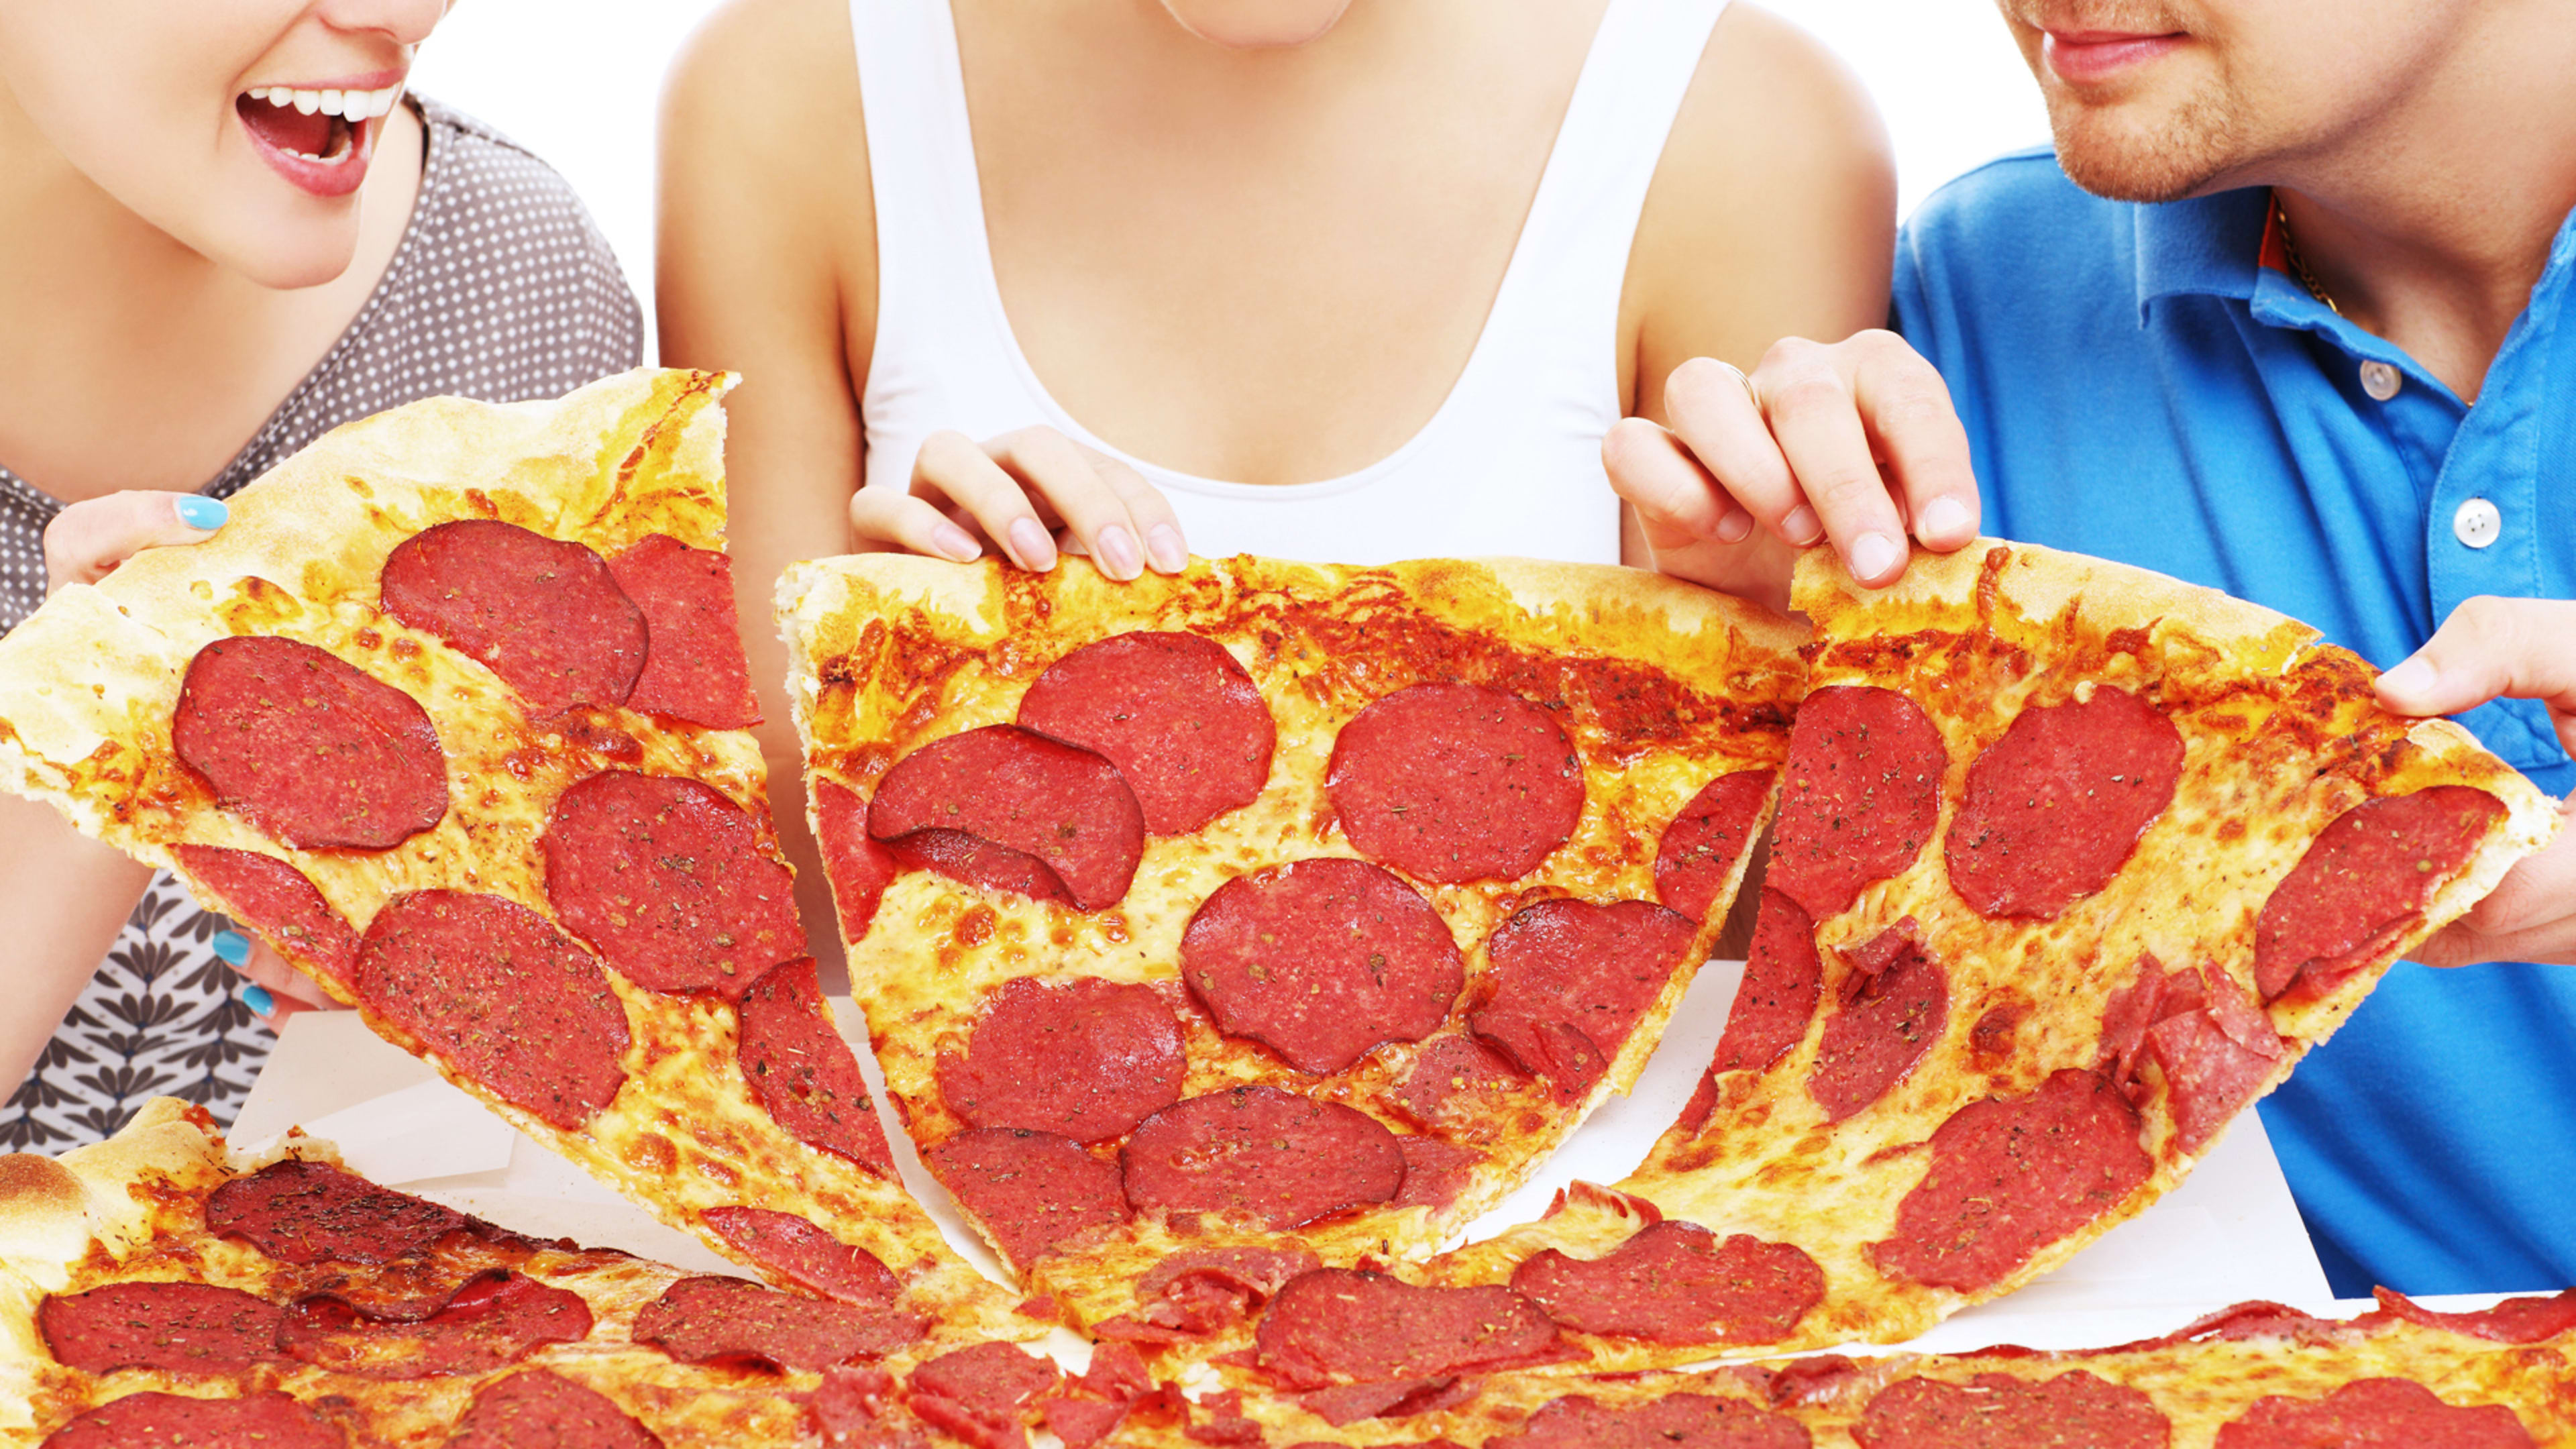 Hot Sauce Valentines, “Almost Sexual” Pizza Tweets, And Other Fast Food Social Secrets